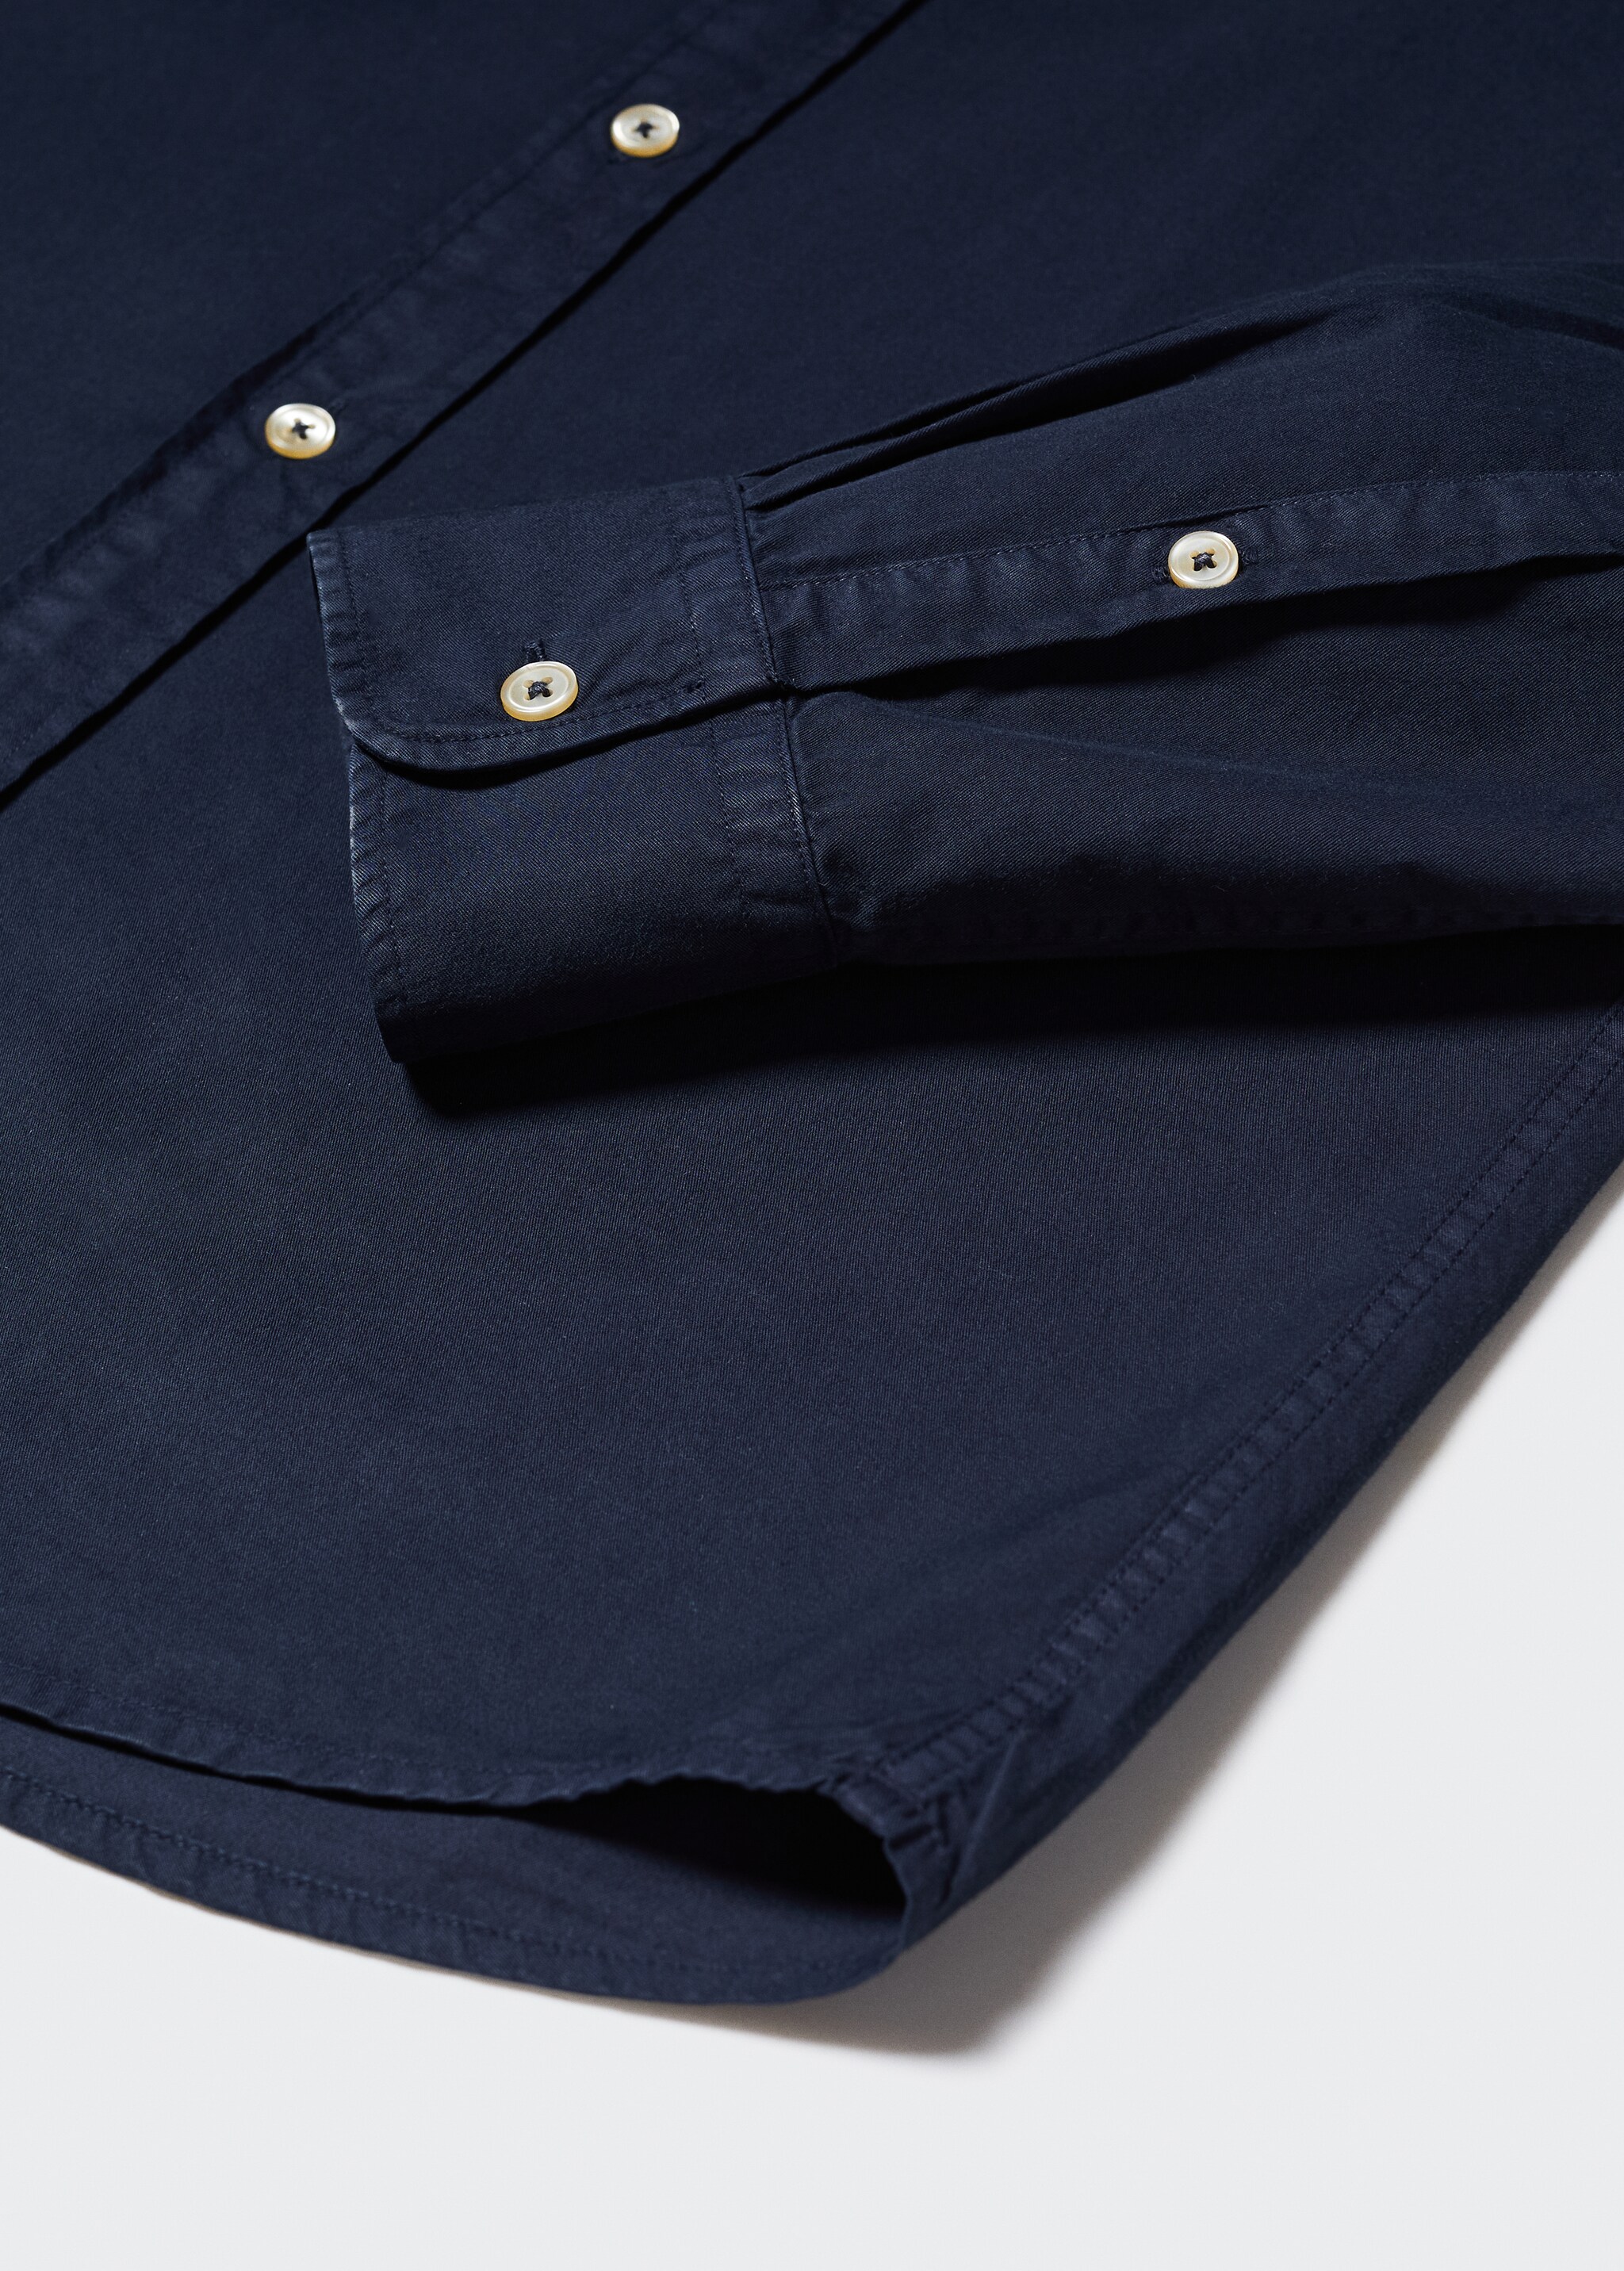 Slim fit cotton shirt - Details of the article 8